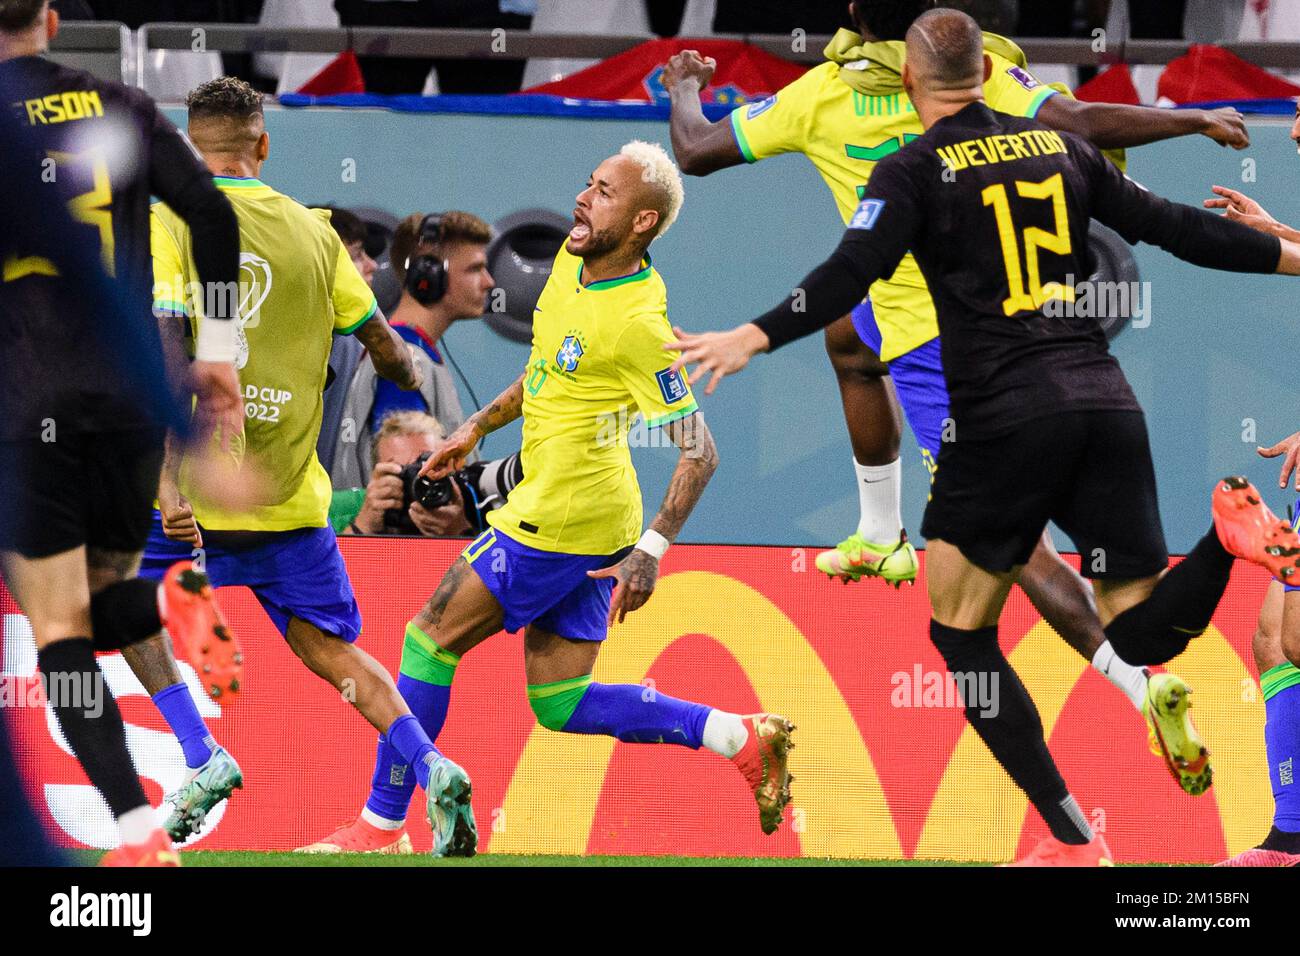 Doha, Qatar. 09th Dec, 2022. Education City Stadium Neymar of Brazil celebrates after scoring a goal (0-1) during the match between Croatia and Brazil, valid for the quarterfinals of the World Cup, held at the Education City Stadium in Doha, Qatar. (Marcio Machado/SPP) Credit: SPP Sport Press Photo. /Alamy Live News Stock Photo